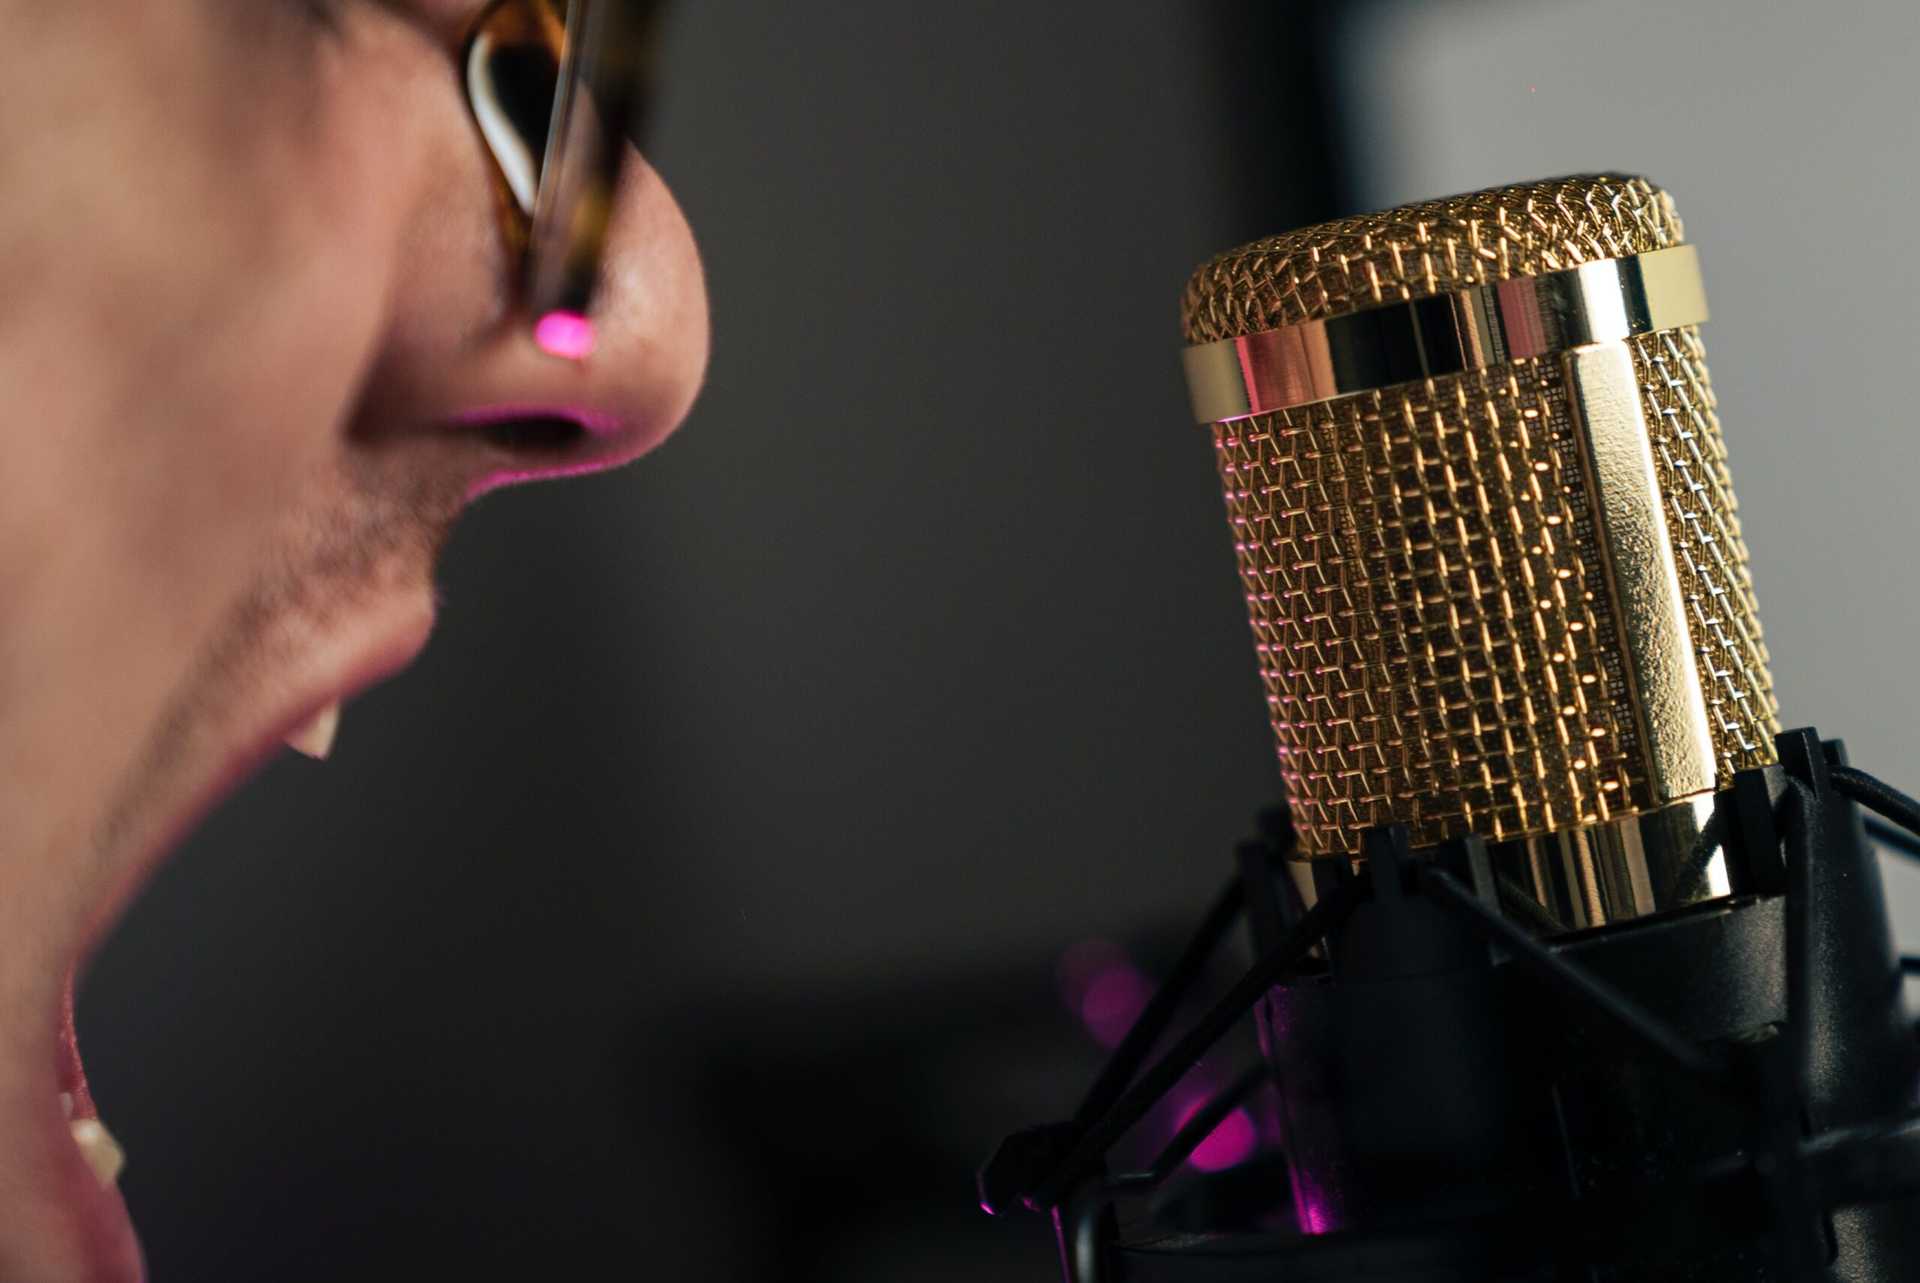 The 9 Best ASMR Microphones for Any Budget: Computer & Mobile